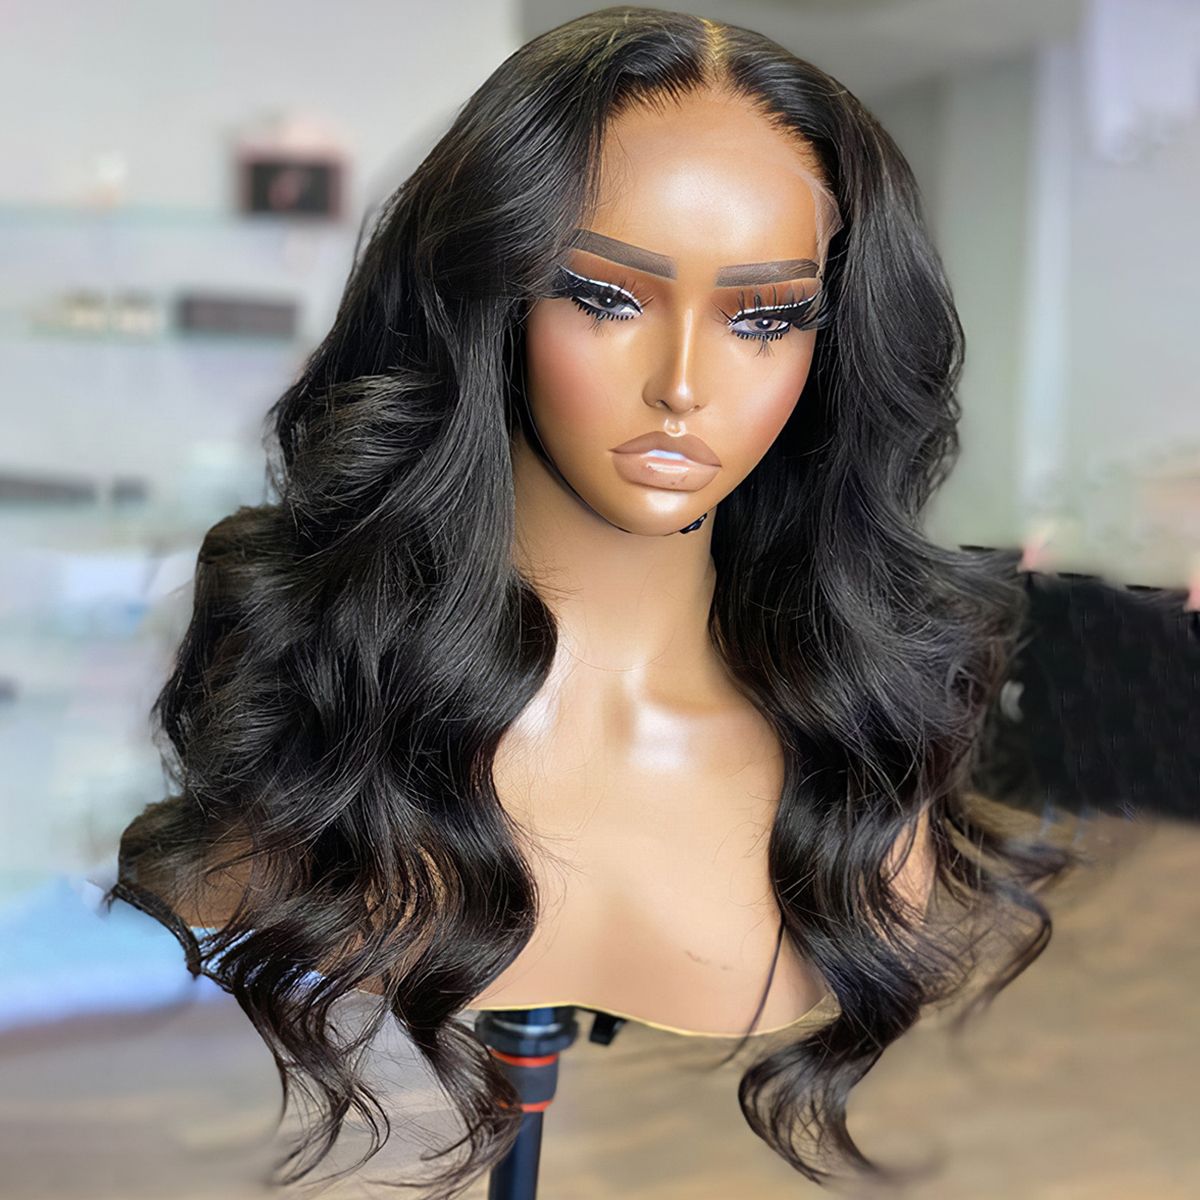  GUSYBG curly hd lace front wig body wave lace front wigs lace  wig cap 5x5 hd lace closure wigs 180 density 30 inch lace front wig long  hair for sale items : Beauty & Personal Care